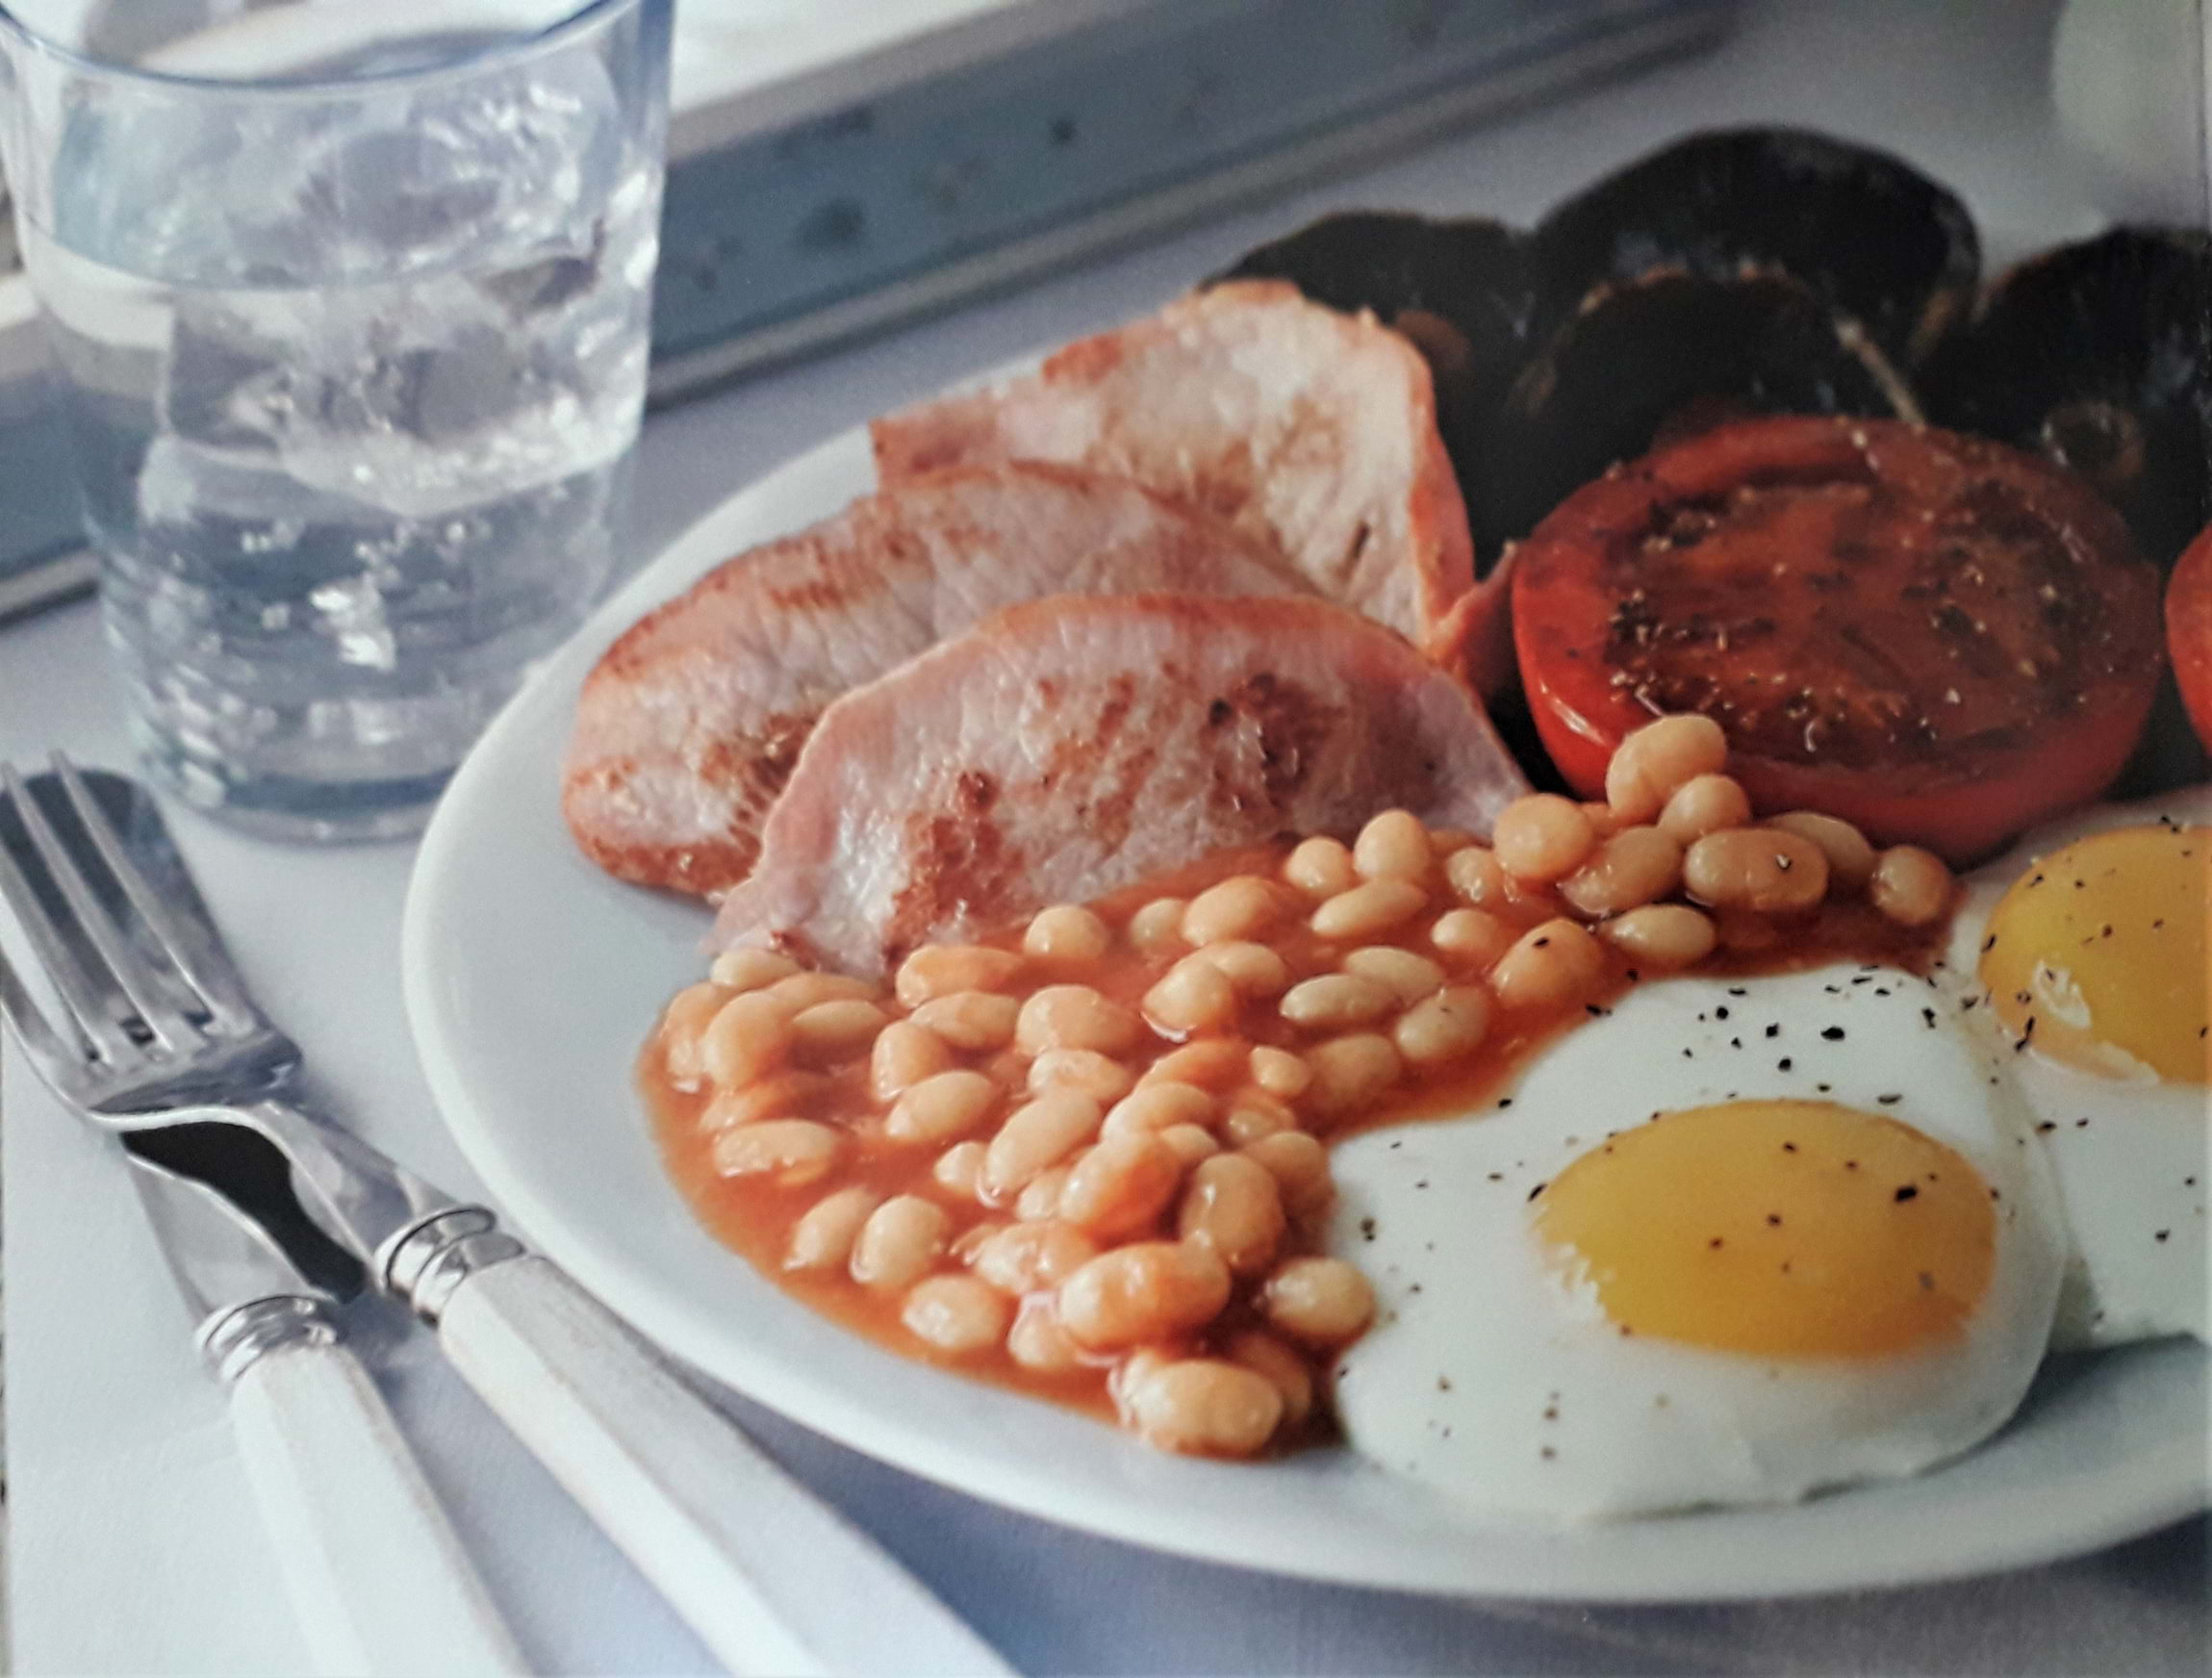 Where to eat a full English breakfast in London